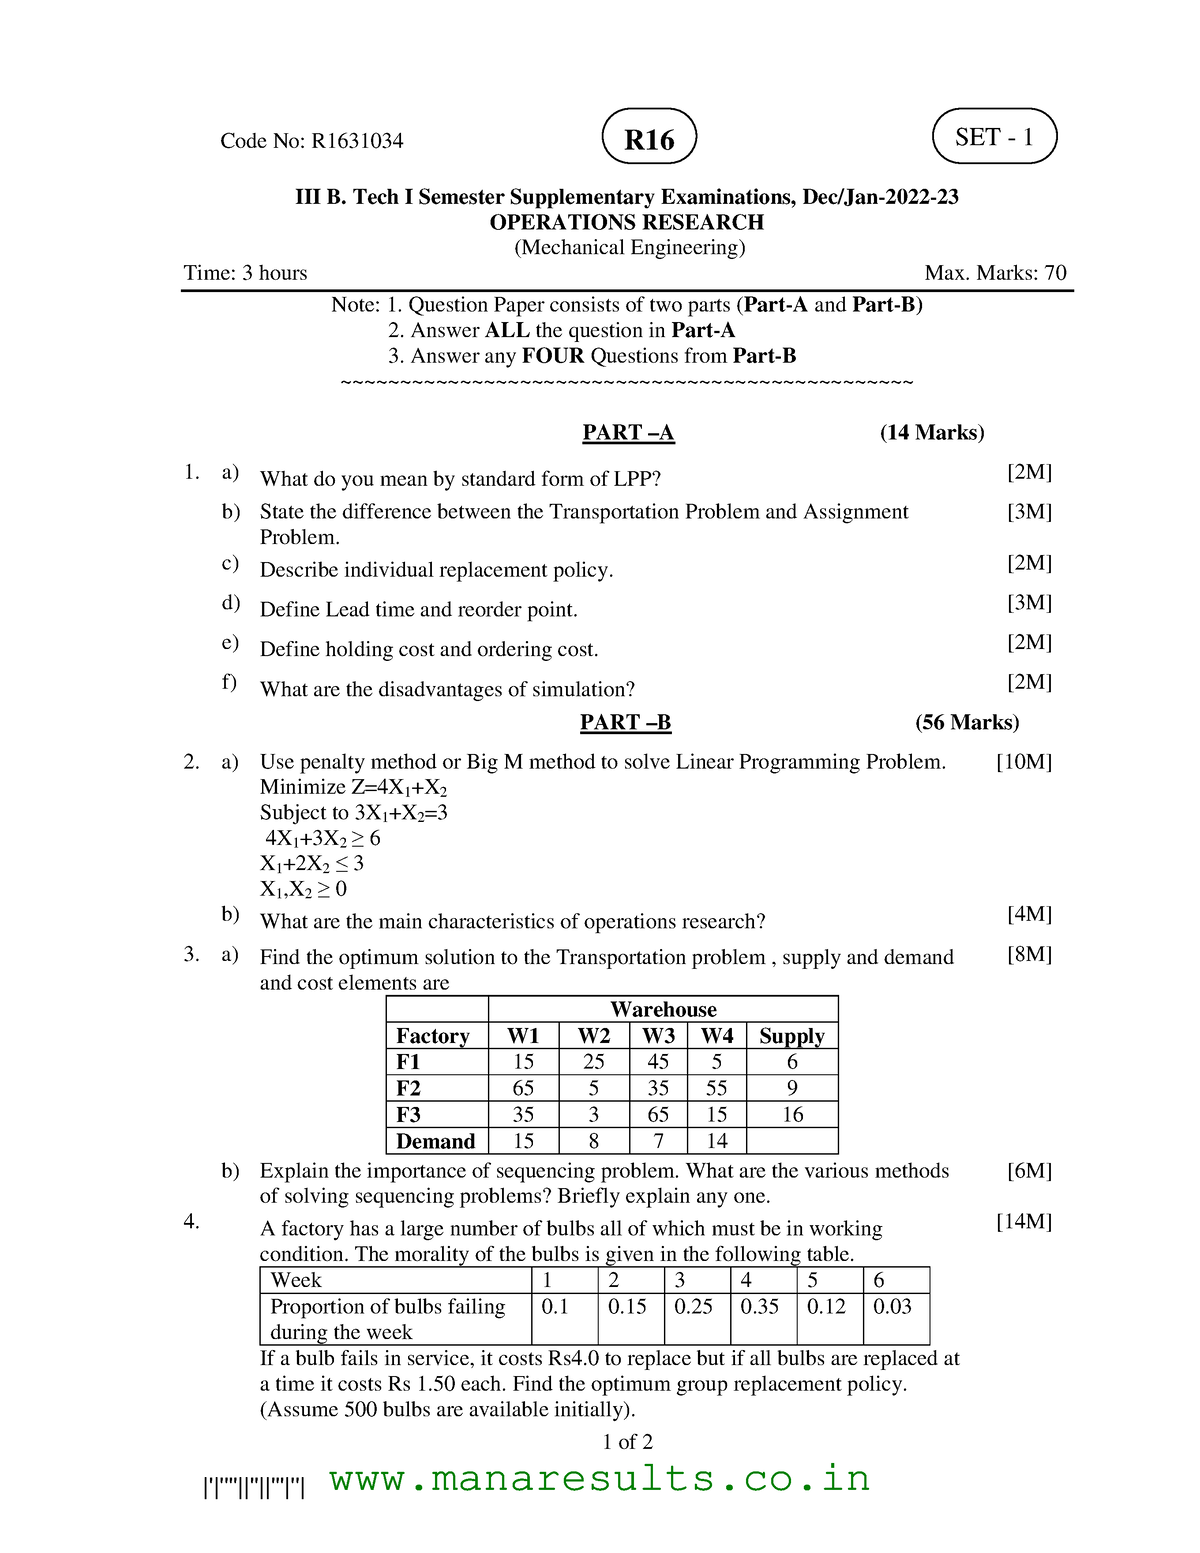 operations research question bank with answers pdf